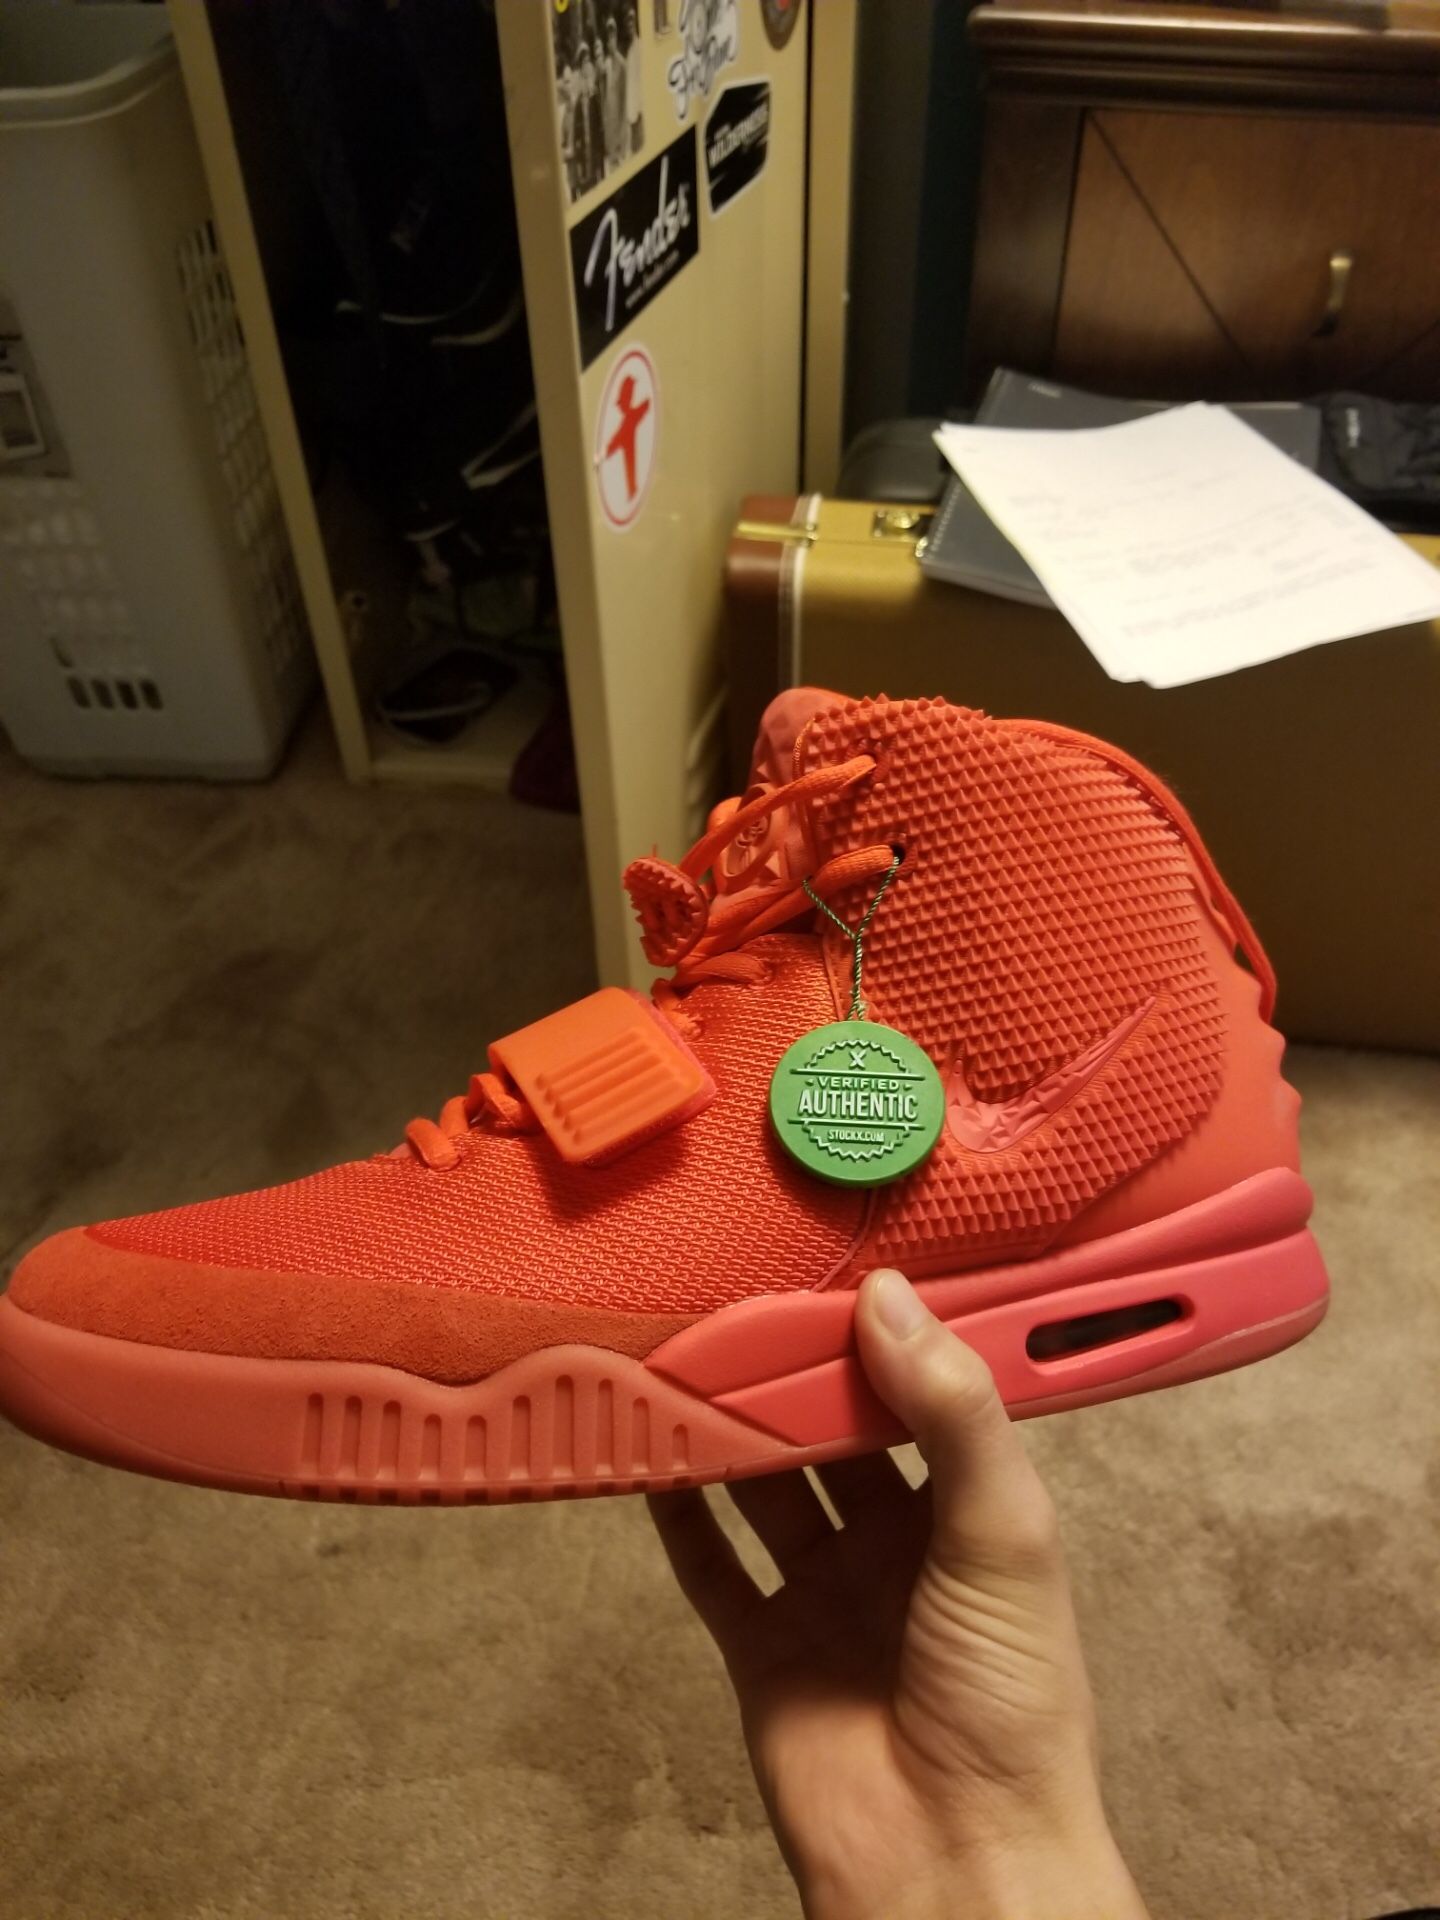 Nike Air Yeezy 2 SP 'Red October' Mens Sneakers - Size 7.0